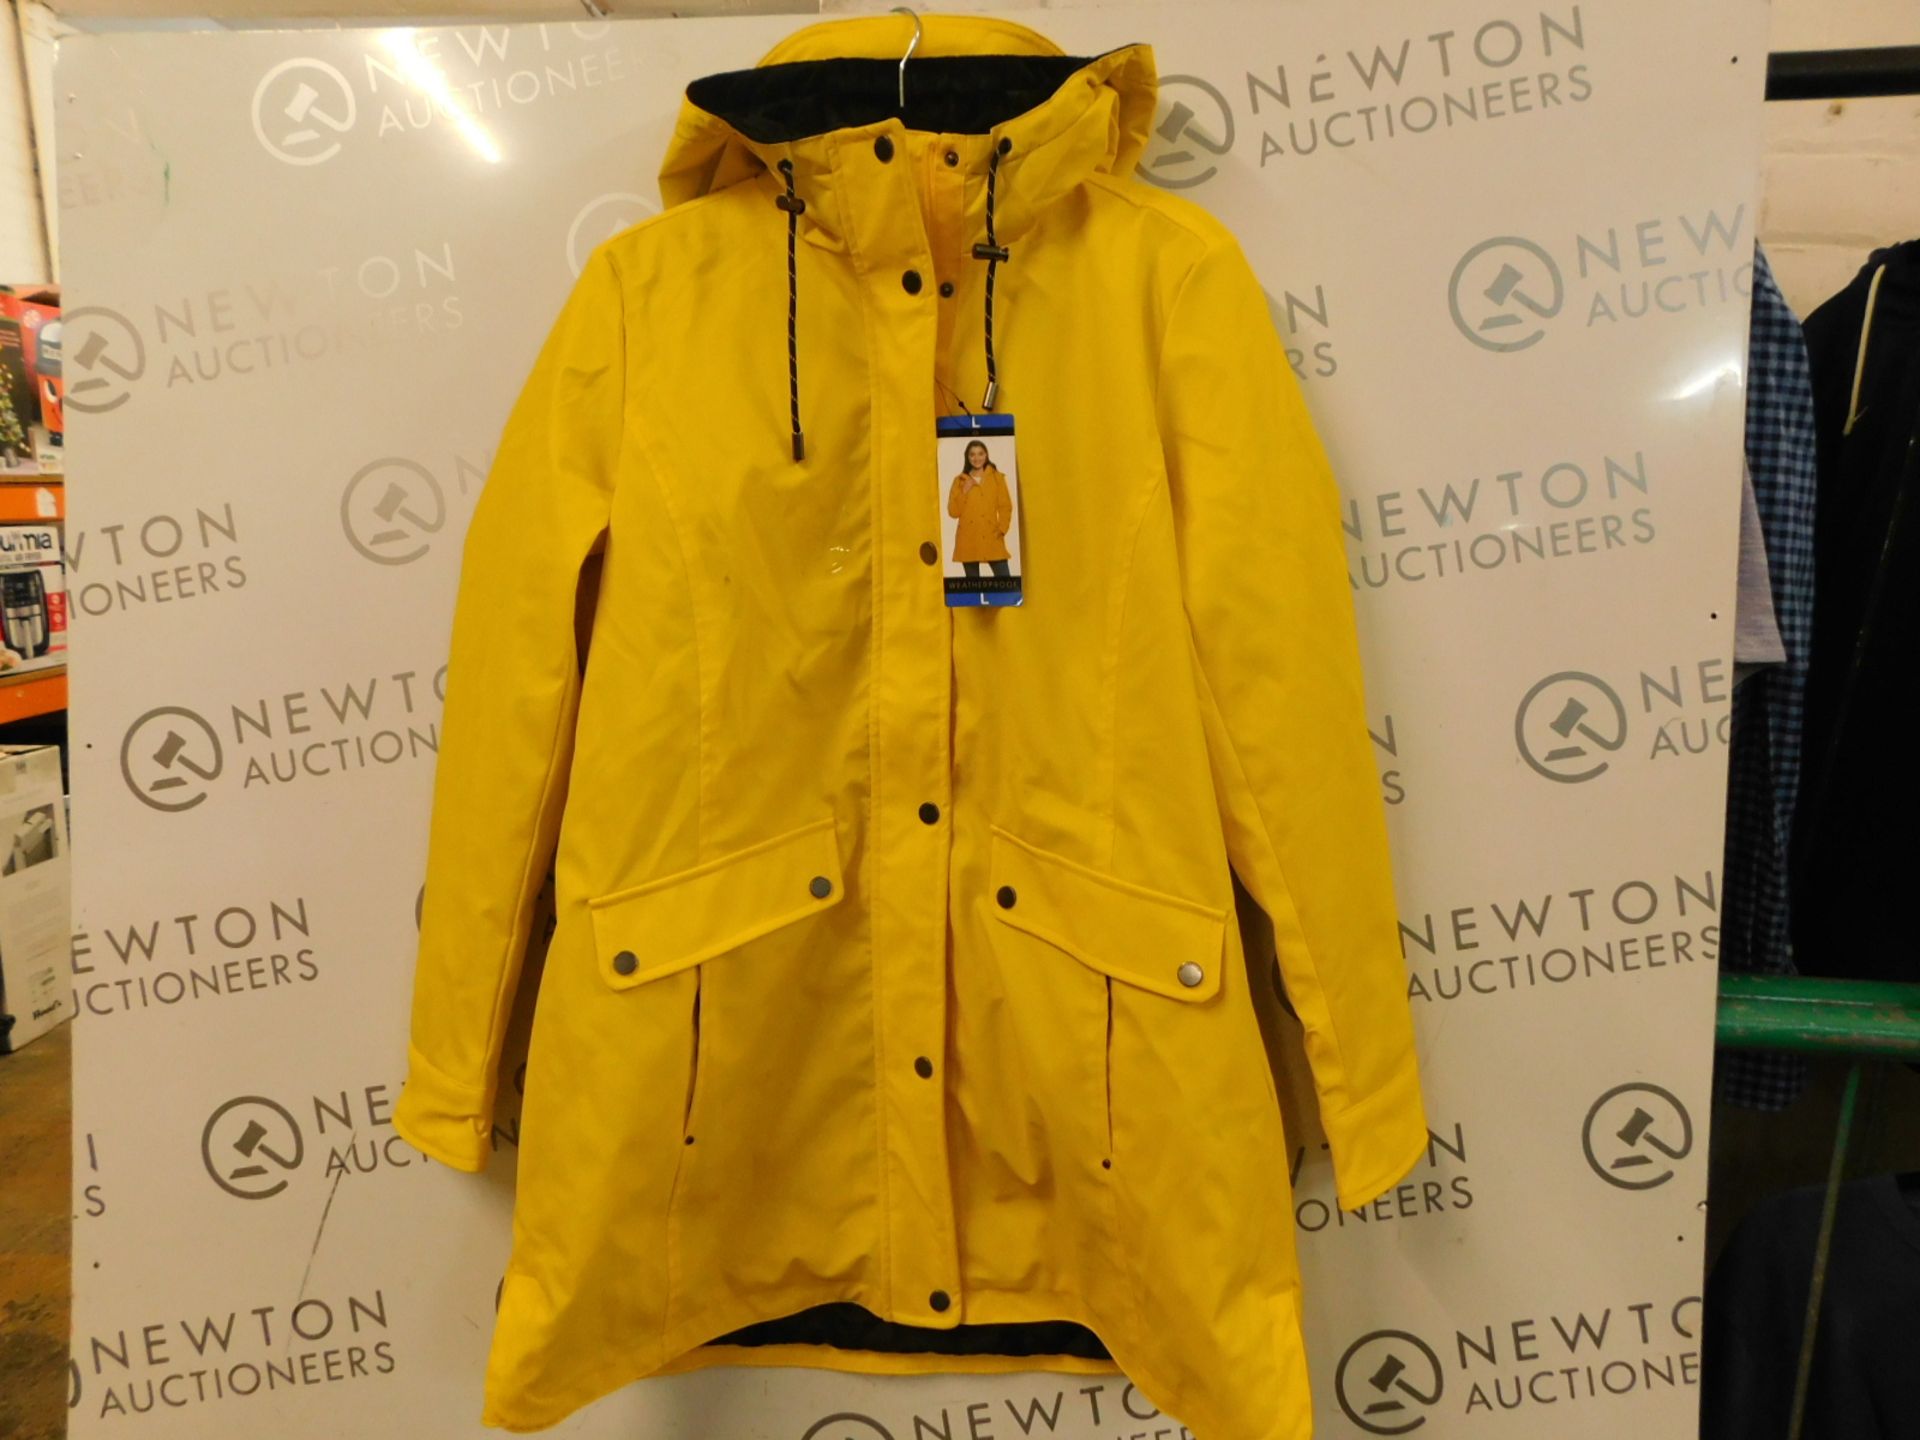 1 LADIES WEATHERPROOF WATER RESISTANT YELLOW JACKET WITH INNER PILE LINING SIZE L RRP Â£59